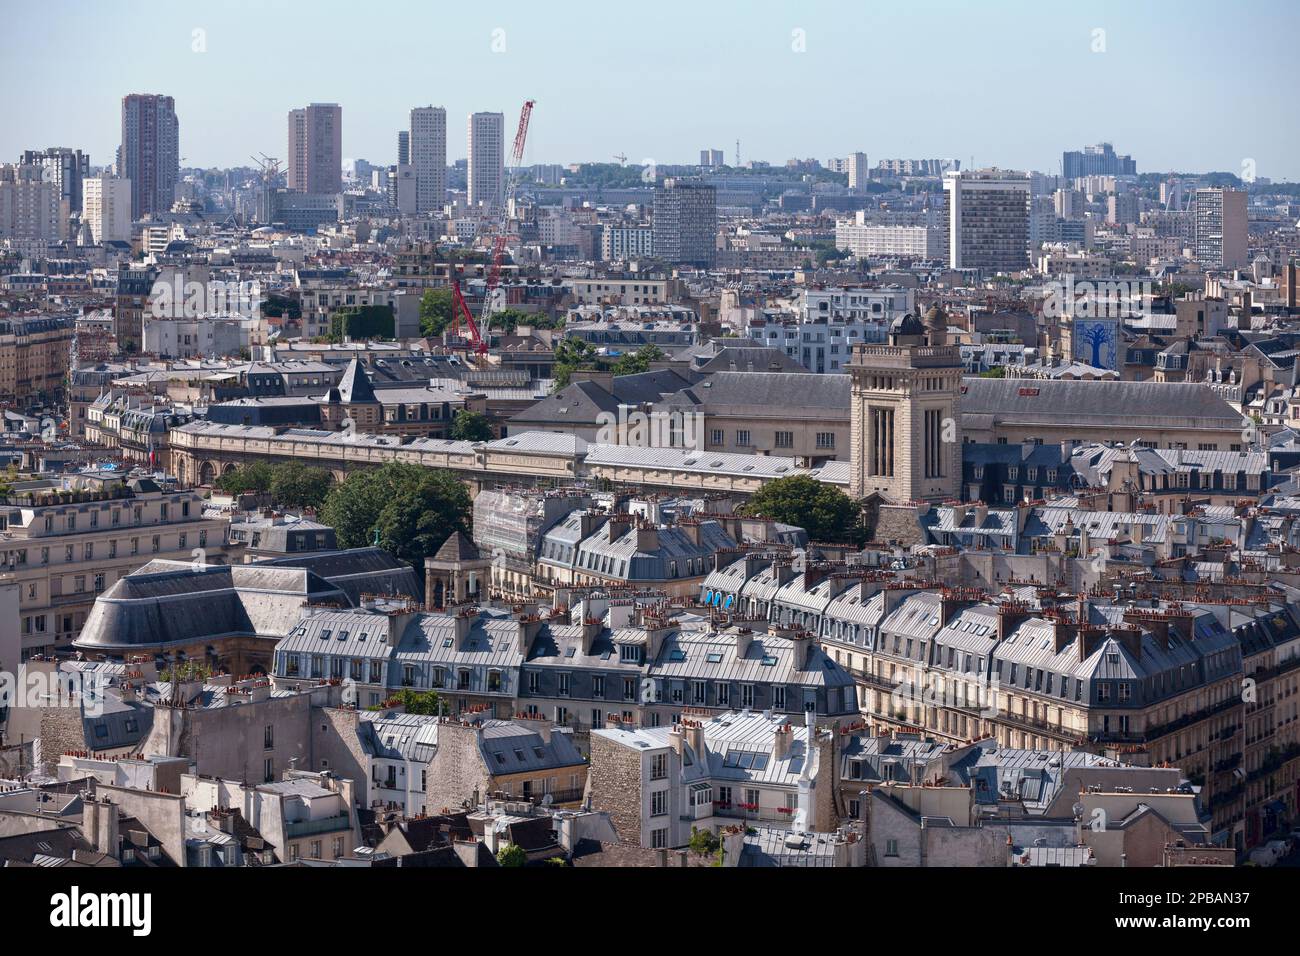 Paris, France - July 17 2017: Aerial view of the École Polytechnique in the 5th arrondissement of Paris, with behind, the mural 'Blue tree'. Stock Photo